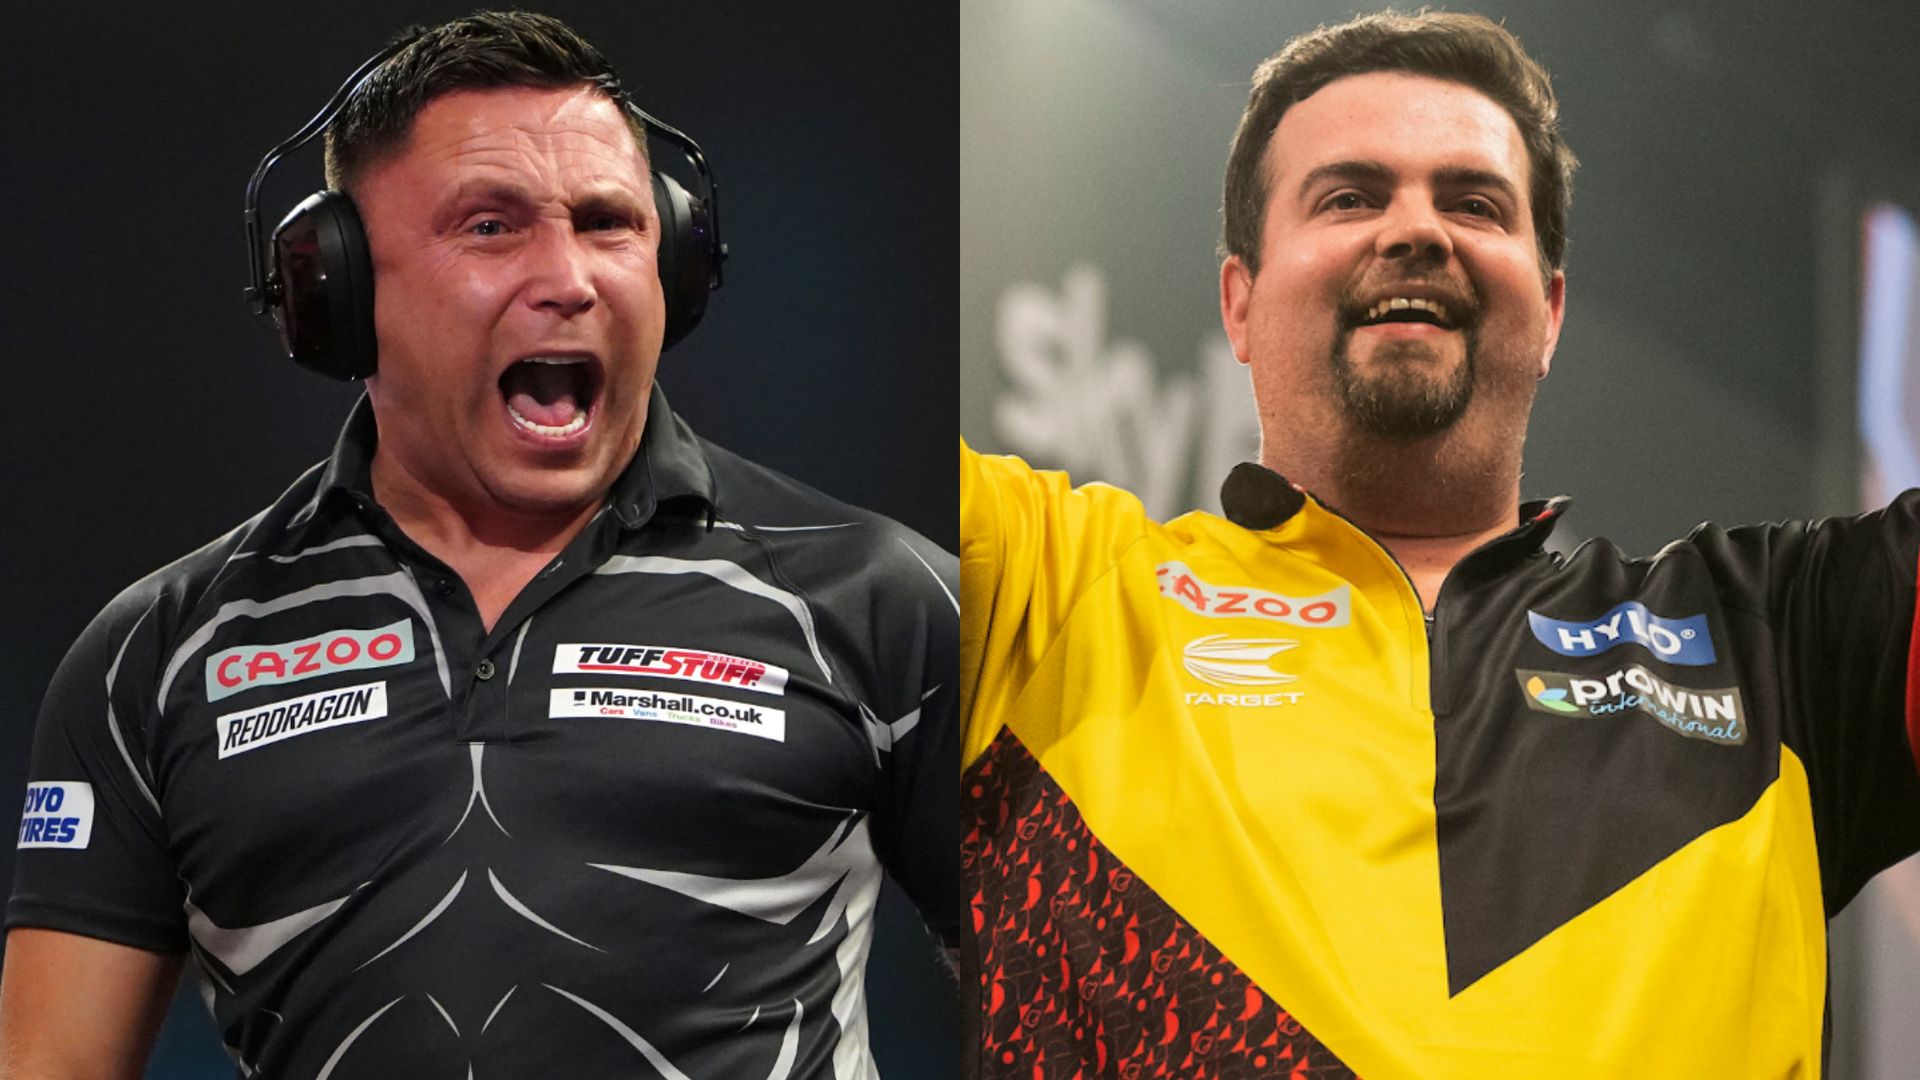 Price silenced by rampant Clemens at Ally Pally I 'Not sure I will ever play here again'